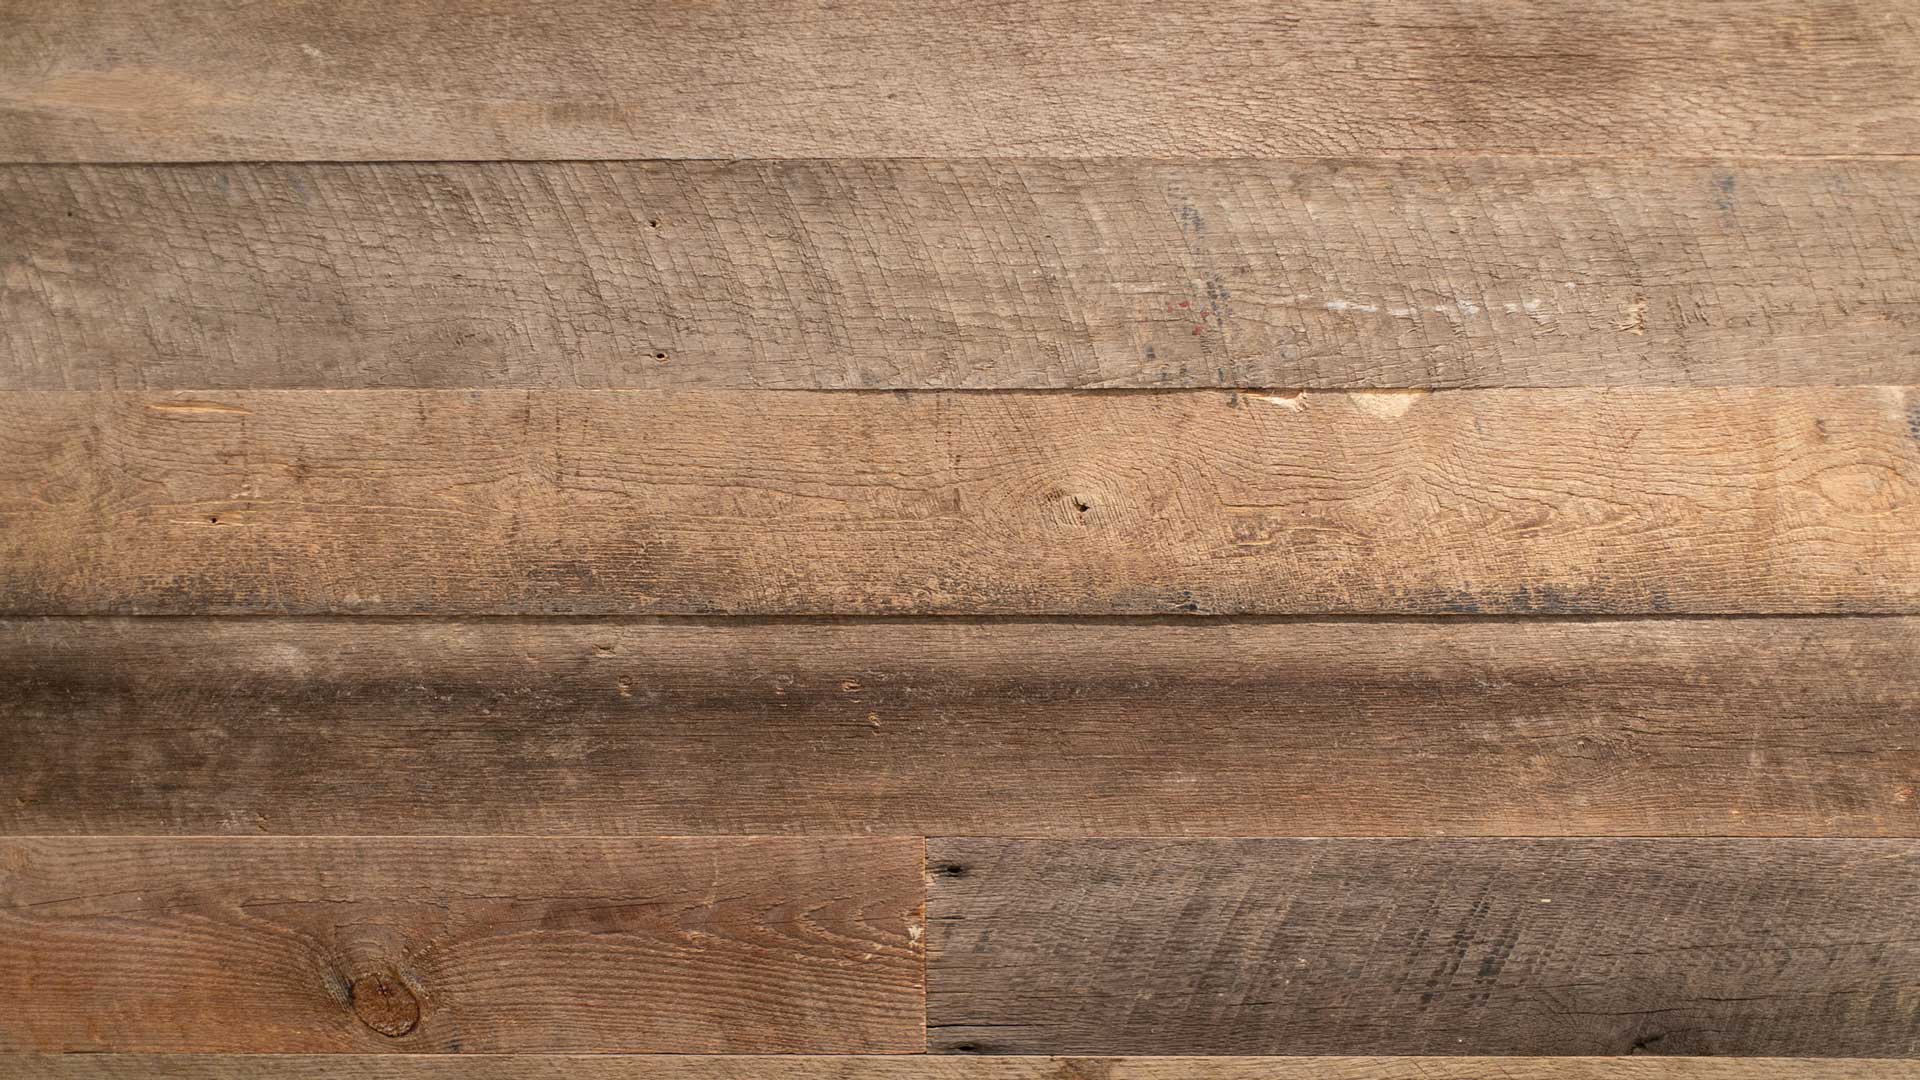 Eastern Mix Reclaimed Wood Wall Planks, 50 sq ft bundle